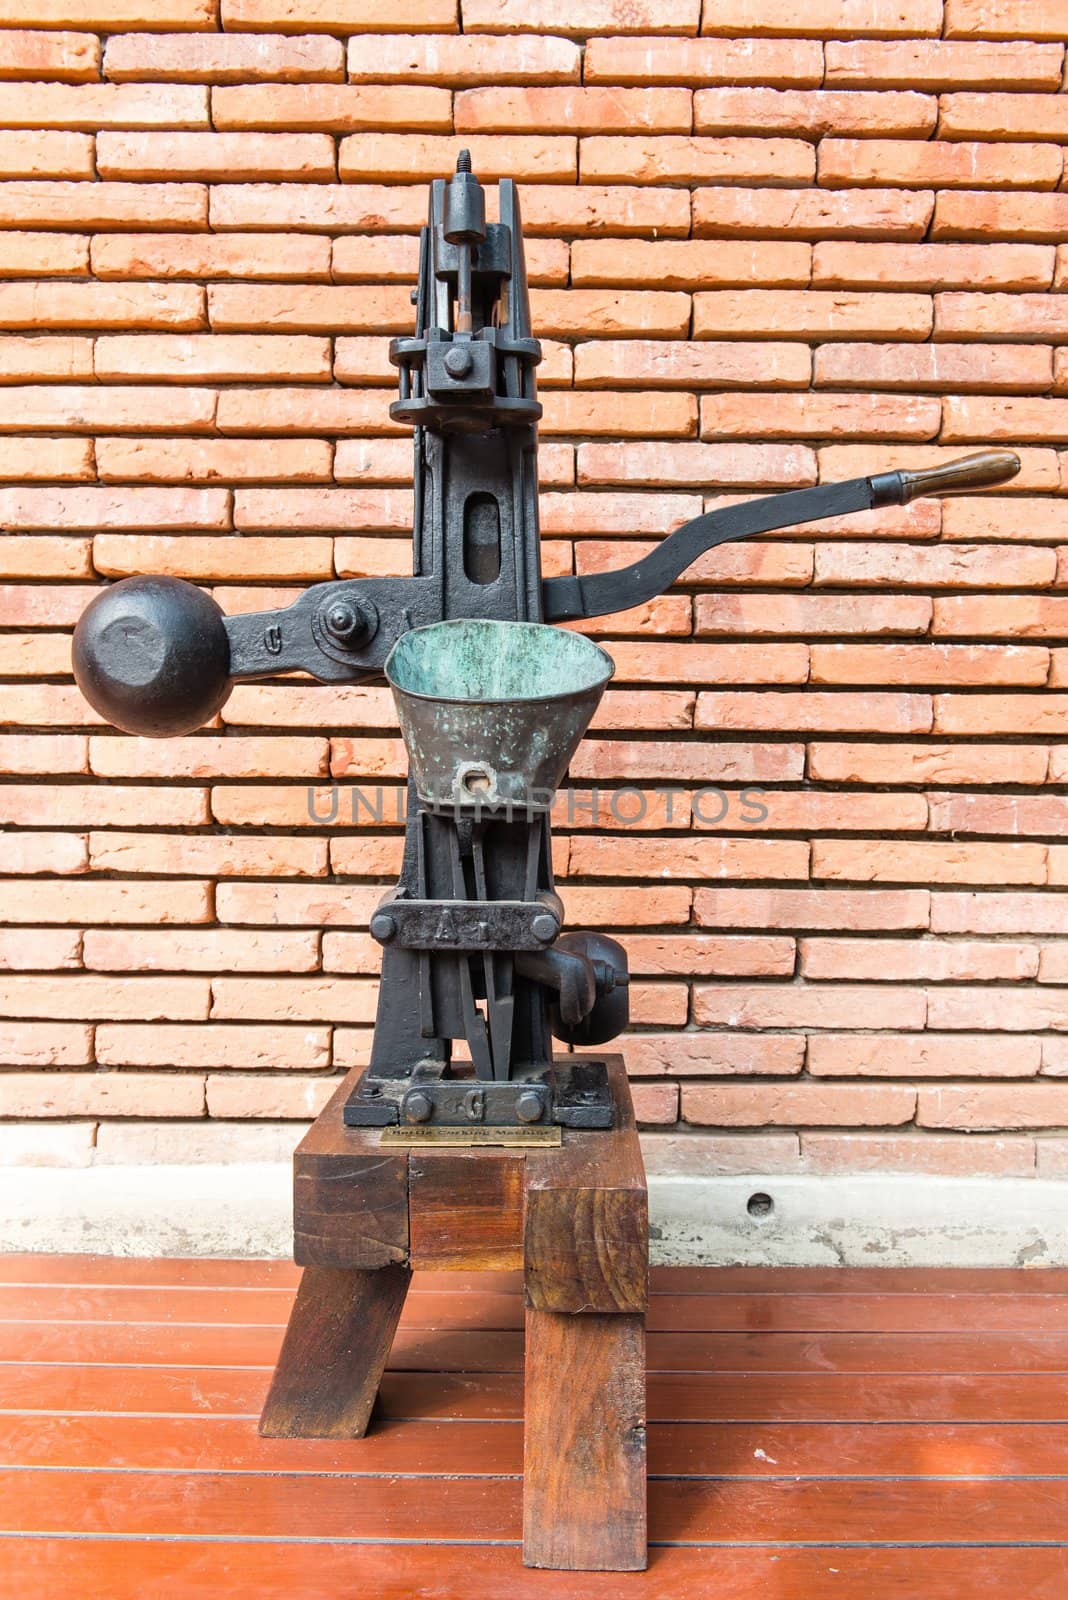 Vintage rusty steel and wooden wine bottle processing equipment by sasilsolutions